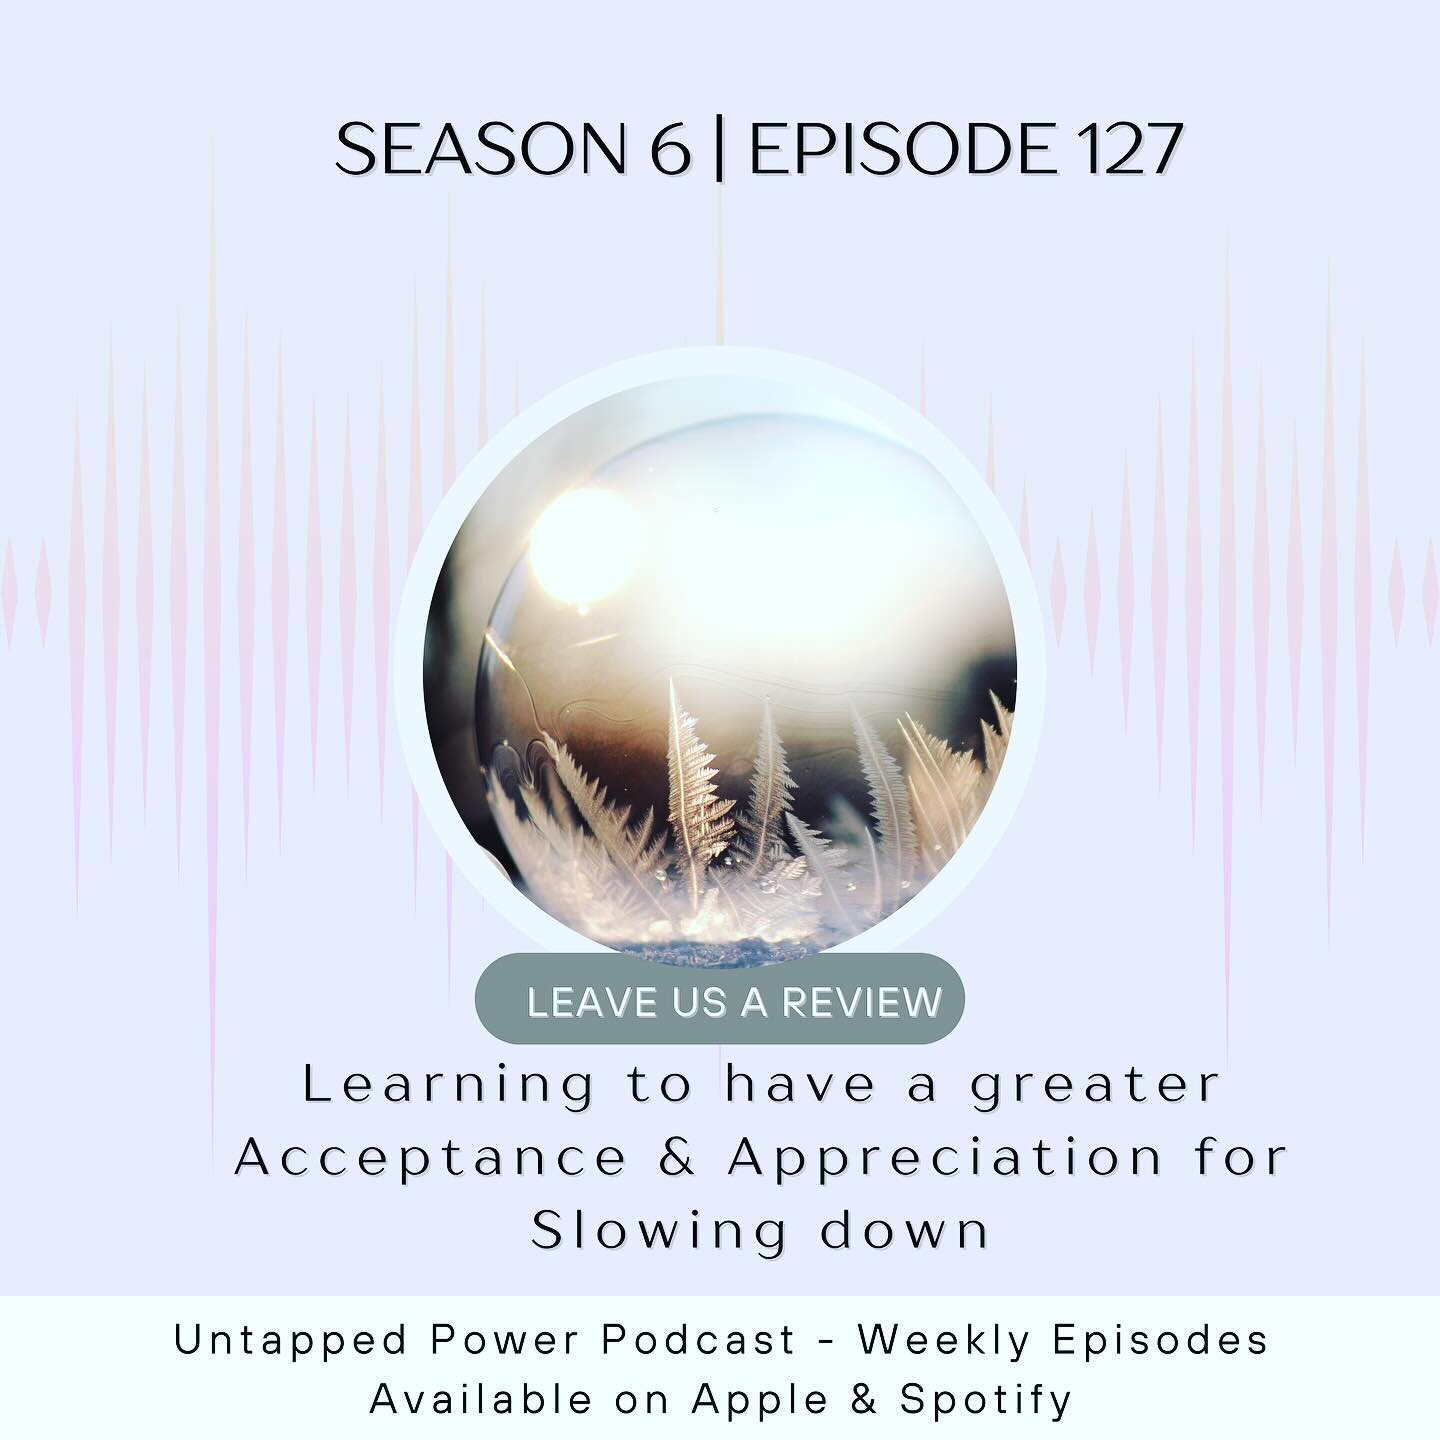 During a time when things happening outside of us can feel chaotic and busy giving you the invitation to slow down with acceptance and appreciation. 

Tune in to this week&rsquo;s podcast episode where I share some tips for slowing down that invite i